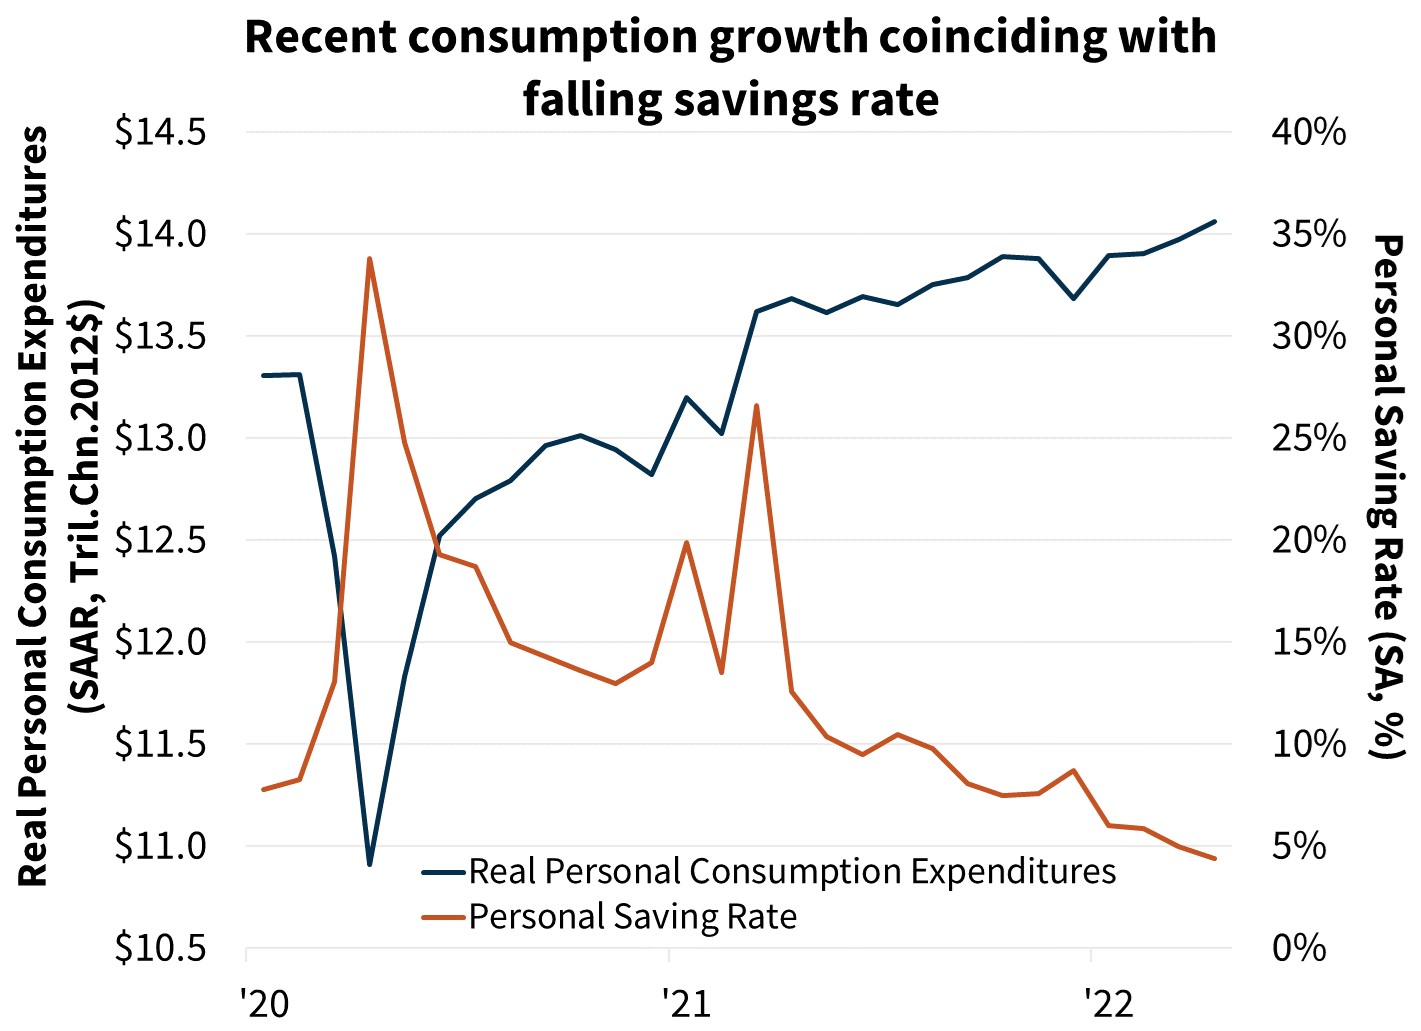  Recent consumption growth coinciding with falling savings rate 